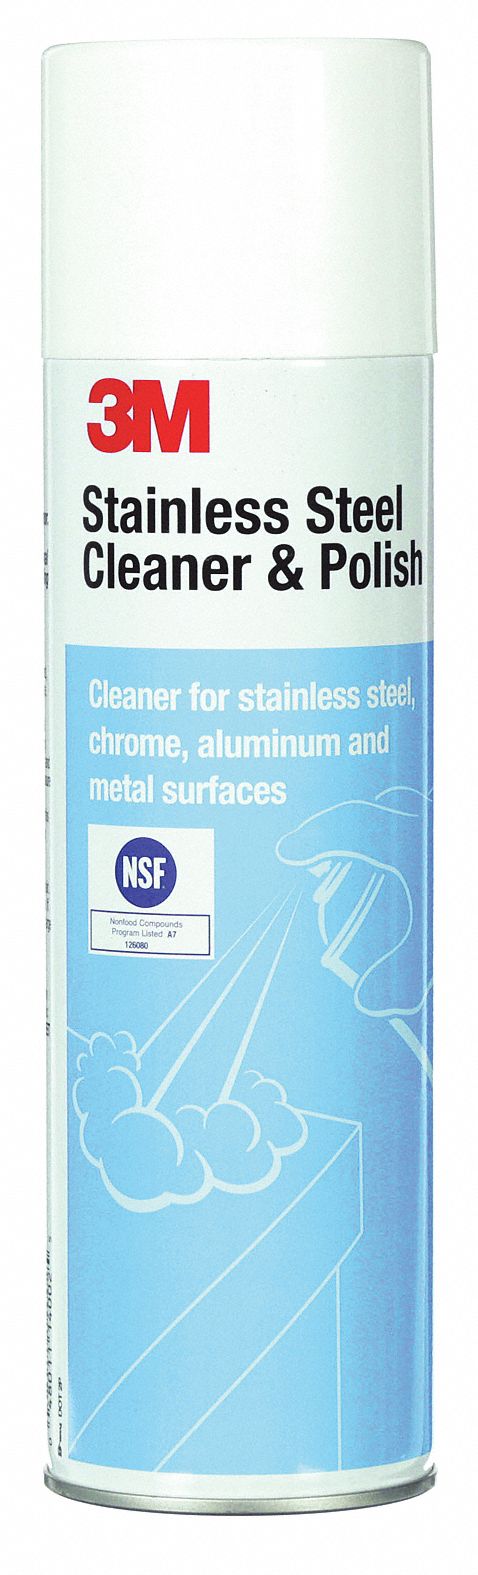 3M Metal Cleaner and Polish, 21 oz. Cleaner Container Size, Aerosol Can Cleaner Container Type - 14002